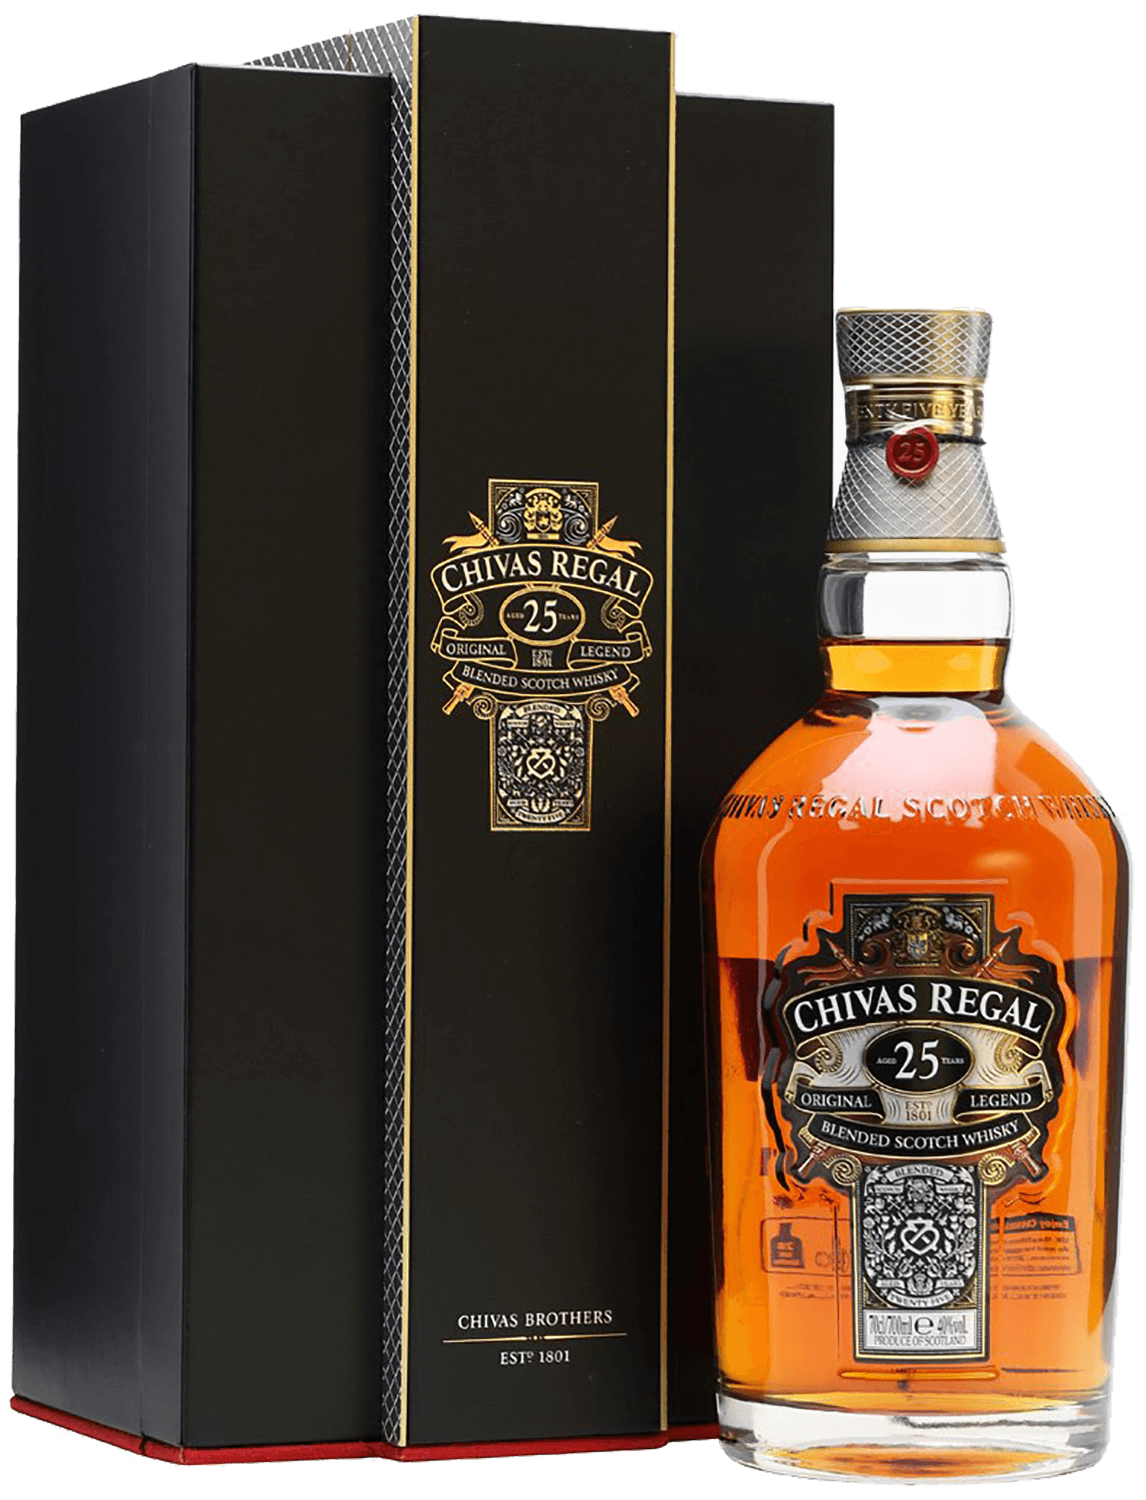 Chivas Regal 25 y.o. blended scotch whisky (gift box) chivas regal extra oloroso sherry cask blended scotch whisky 13 y o gift box